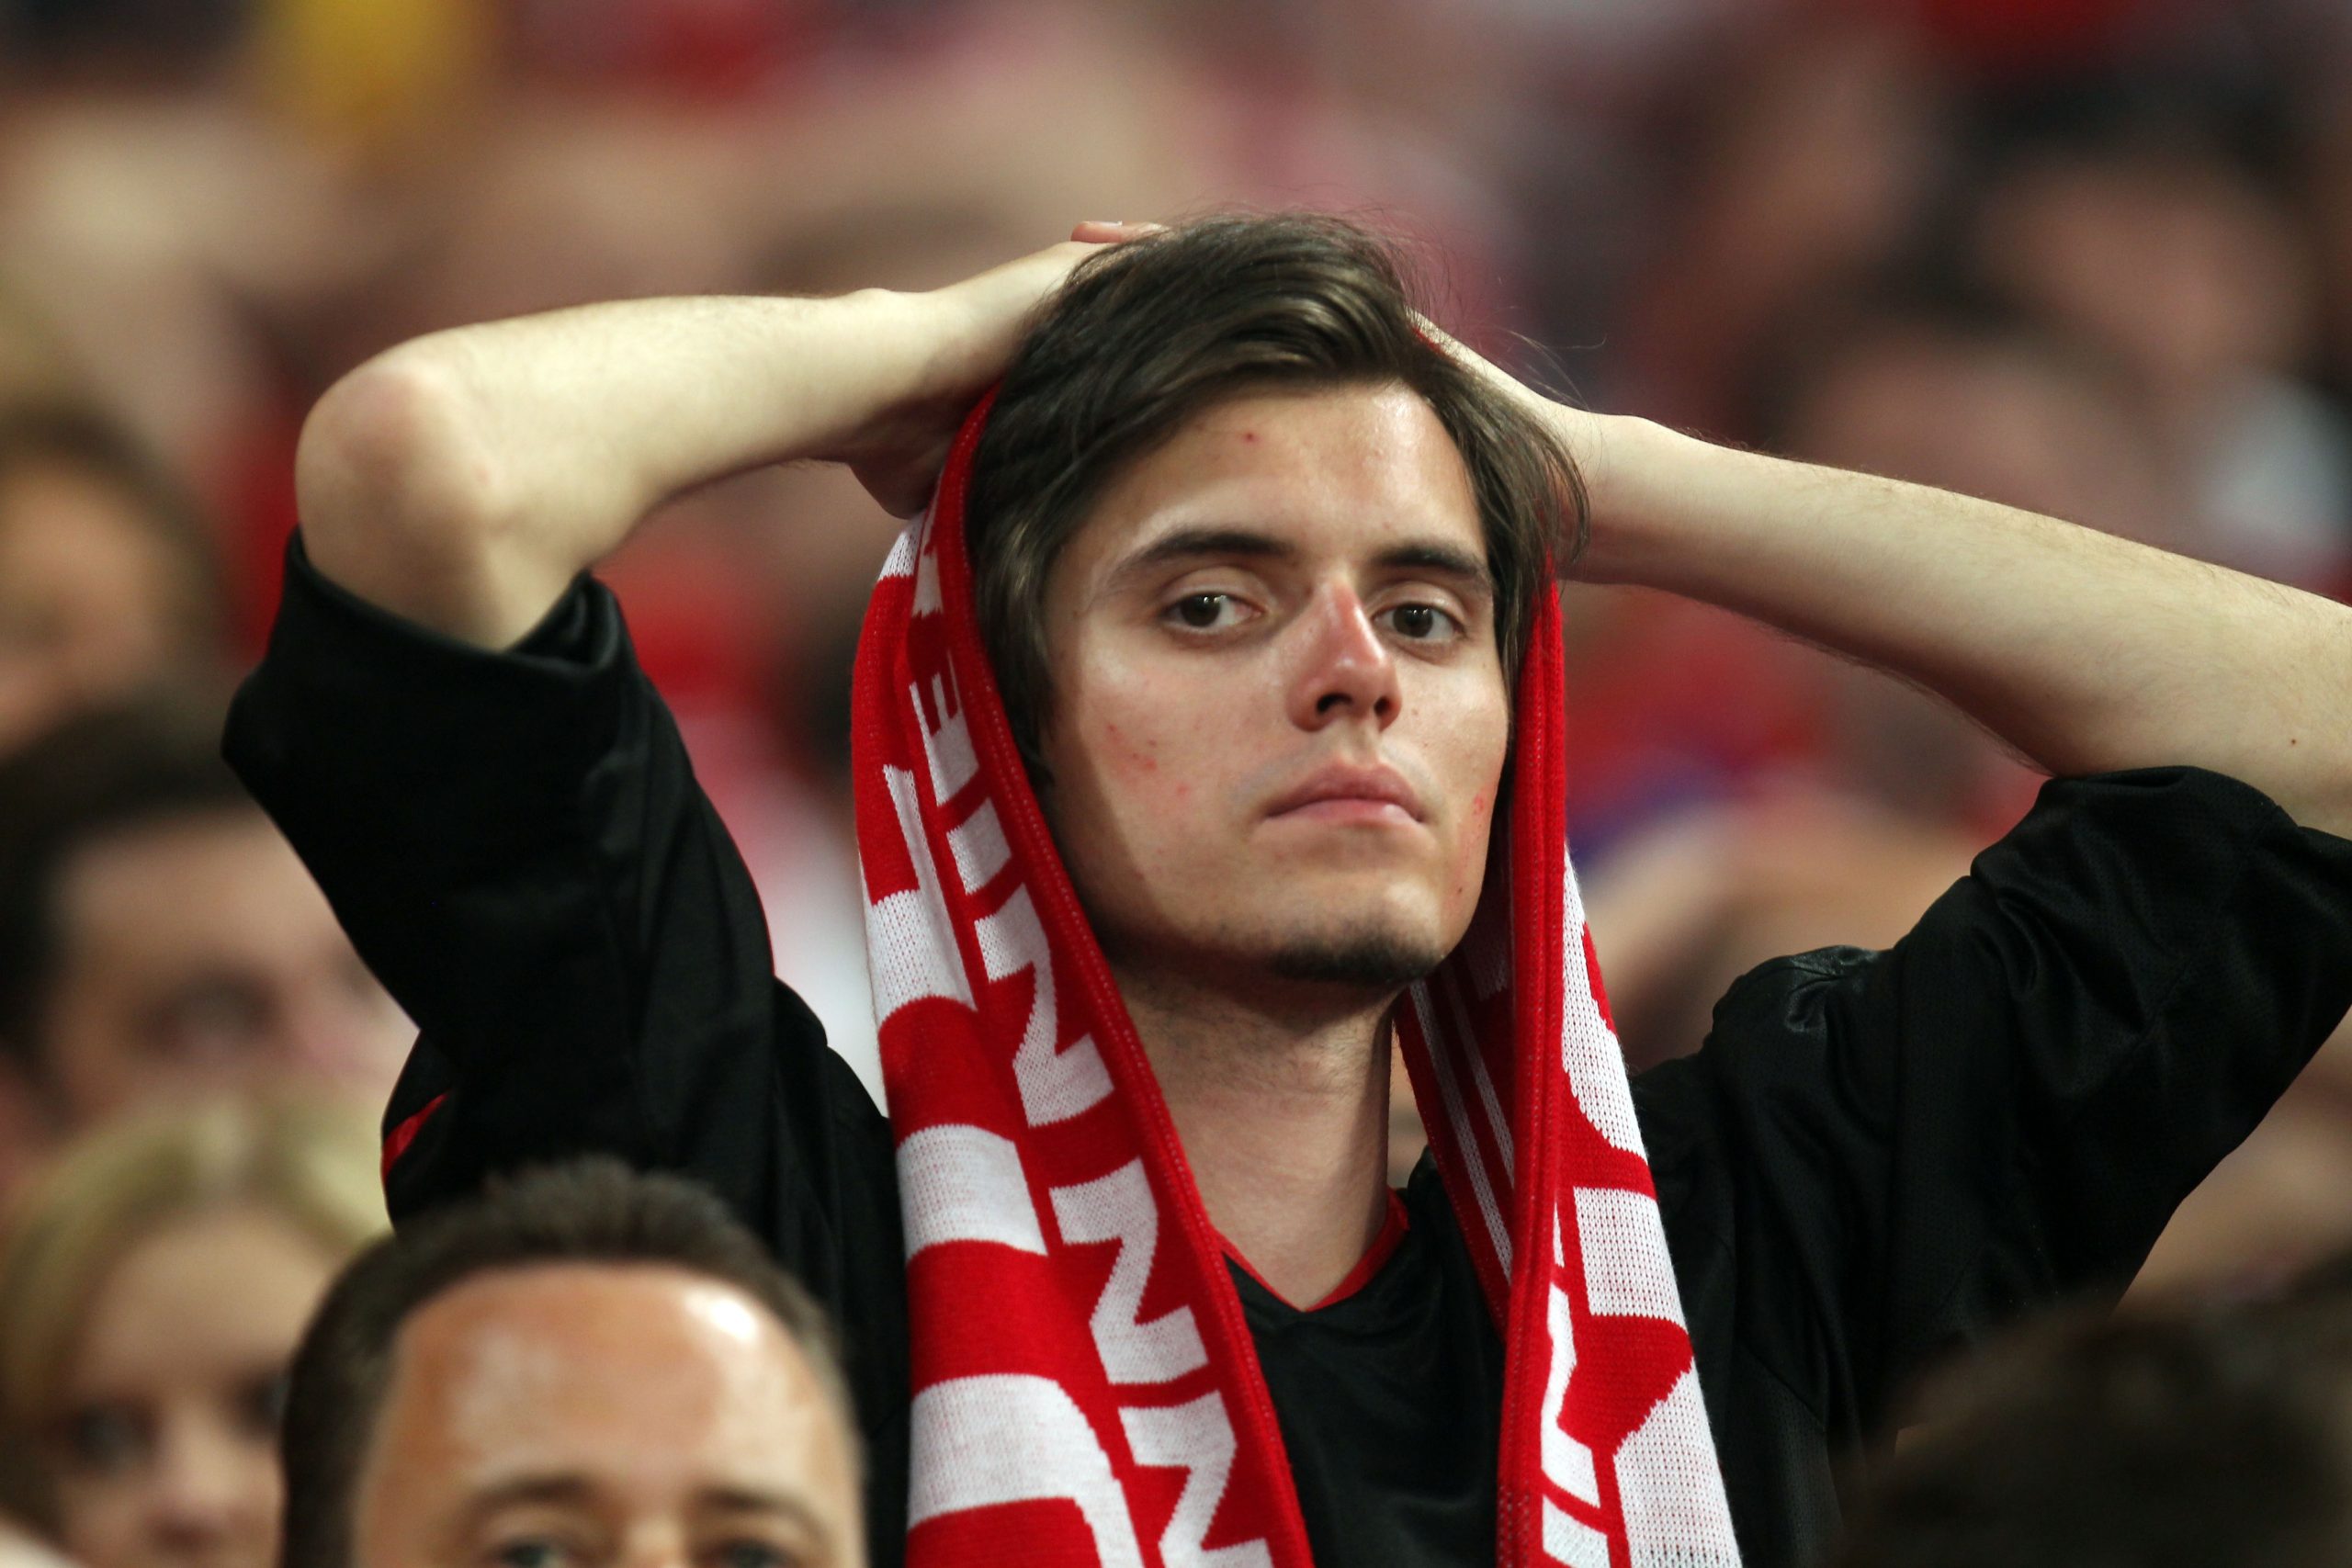 MADRID, SPAIN - MAY 22: A Bayern Muenchen fan looks dejected after their team's defeat at the end of the UEFA Champions League Final match between FC Bayern Muenchen and Inter Milan at the Estadio Santiago Bernabeu on May 22, 2010 in Madrid, Spain.